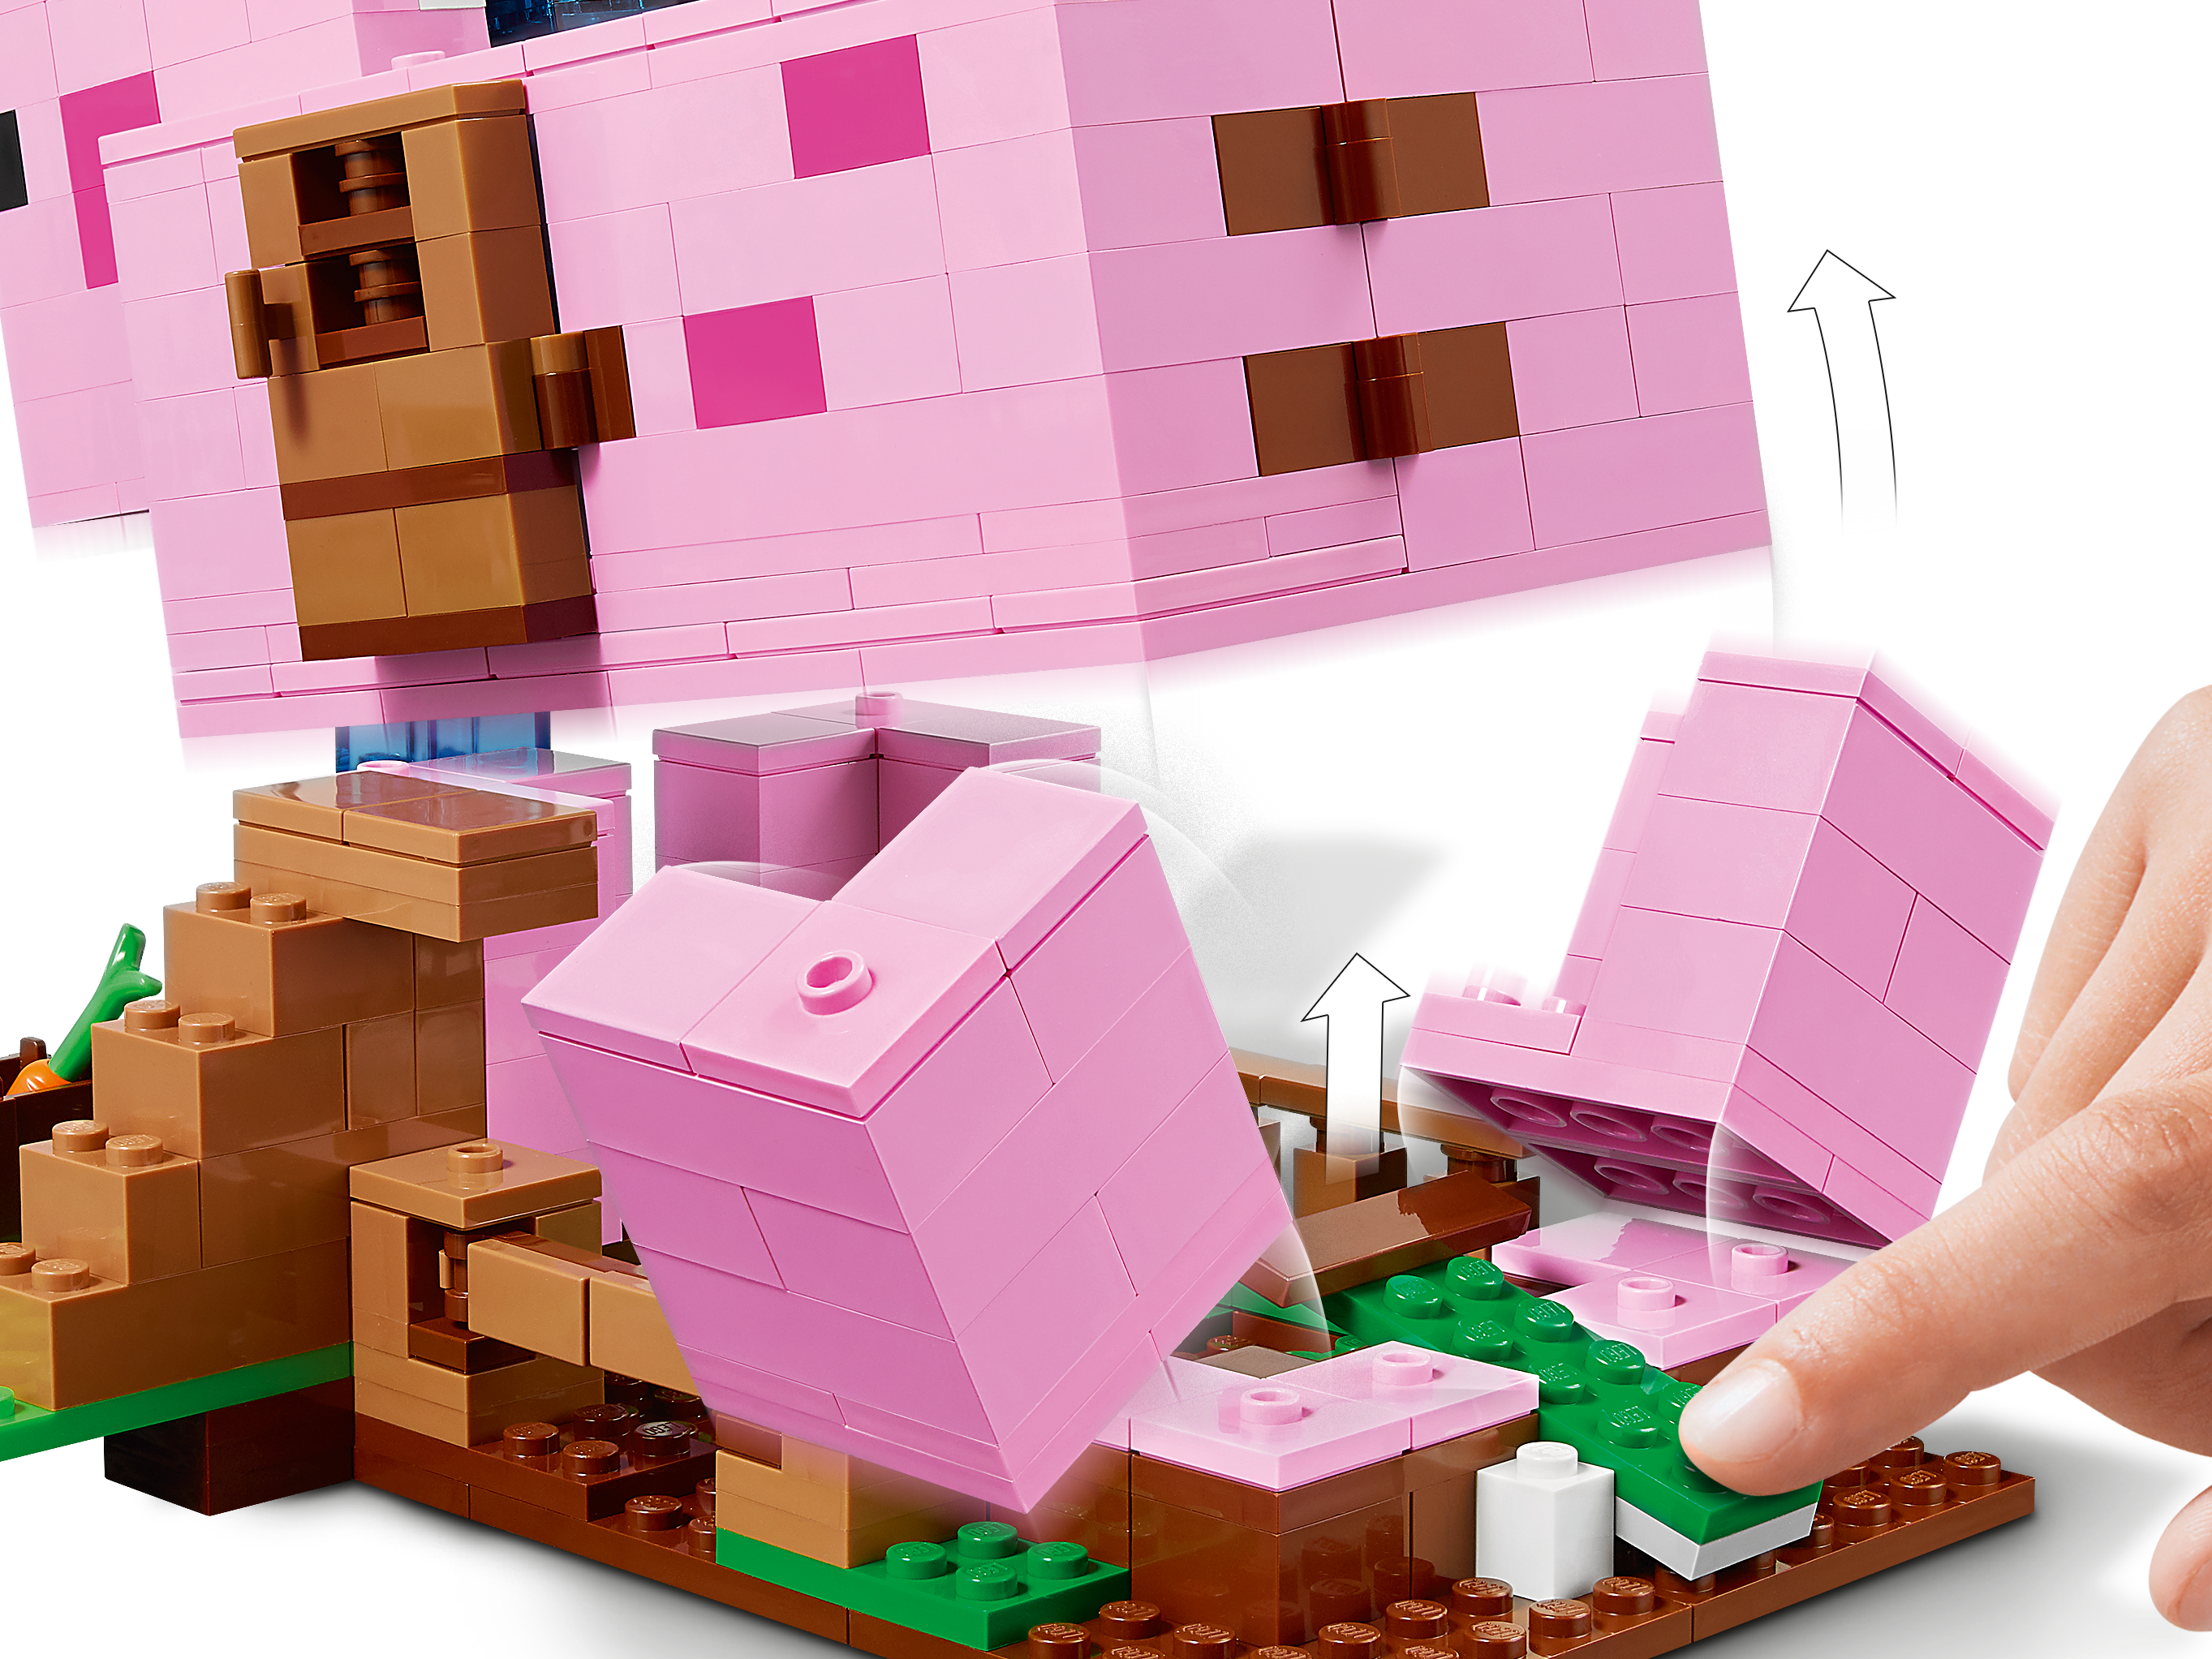 Lego Minecraft The Pig House (21170) 100% Complete No Instructions (use  online)